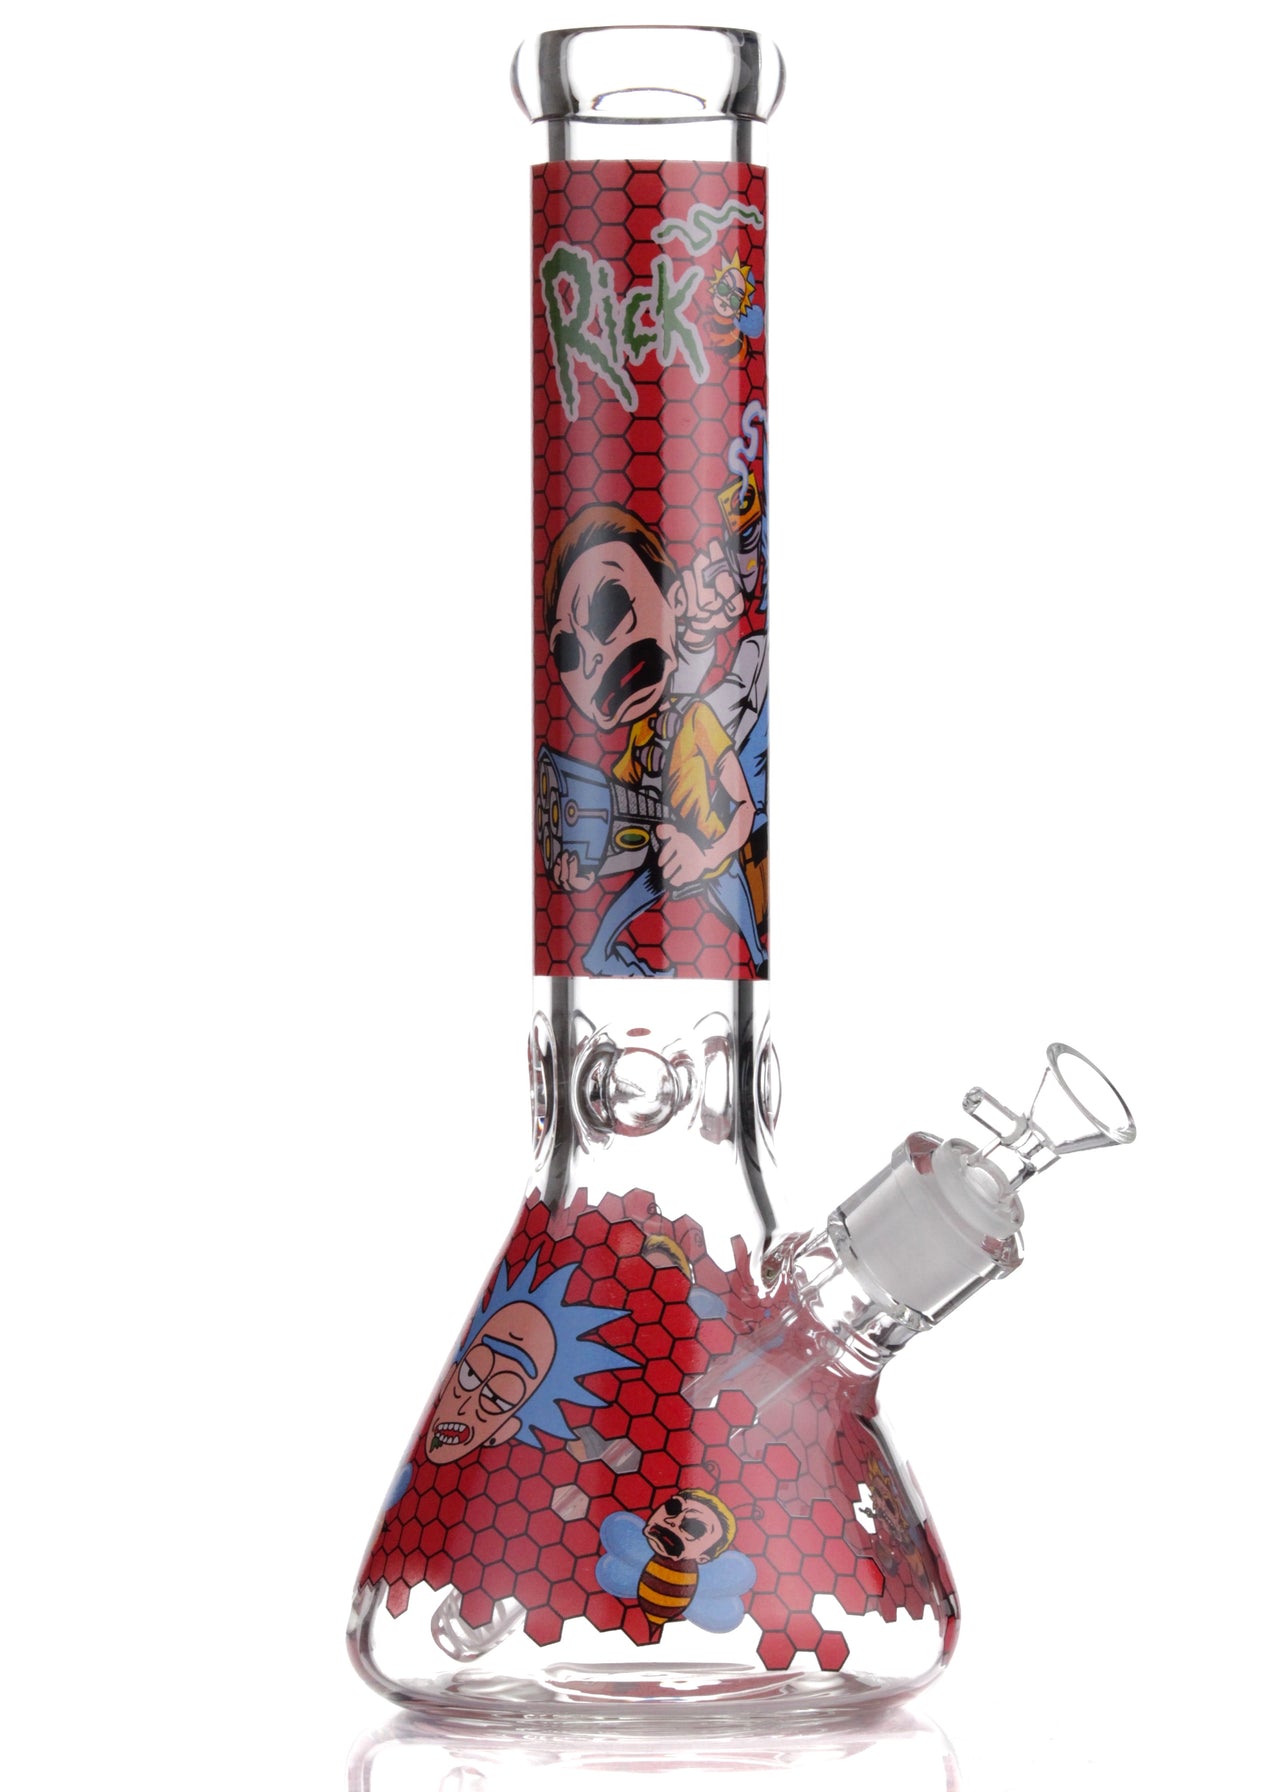 rick and morty 14 inch beaker bong with red honeycomb print